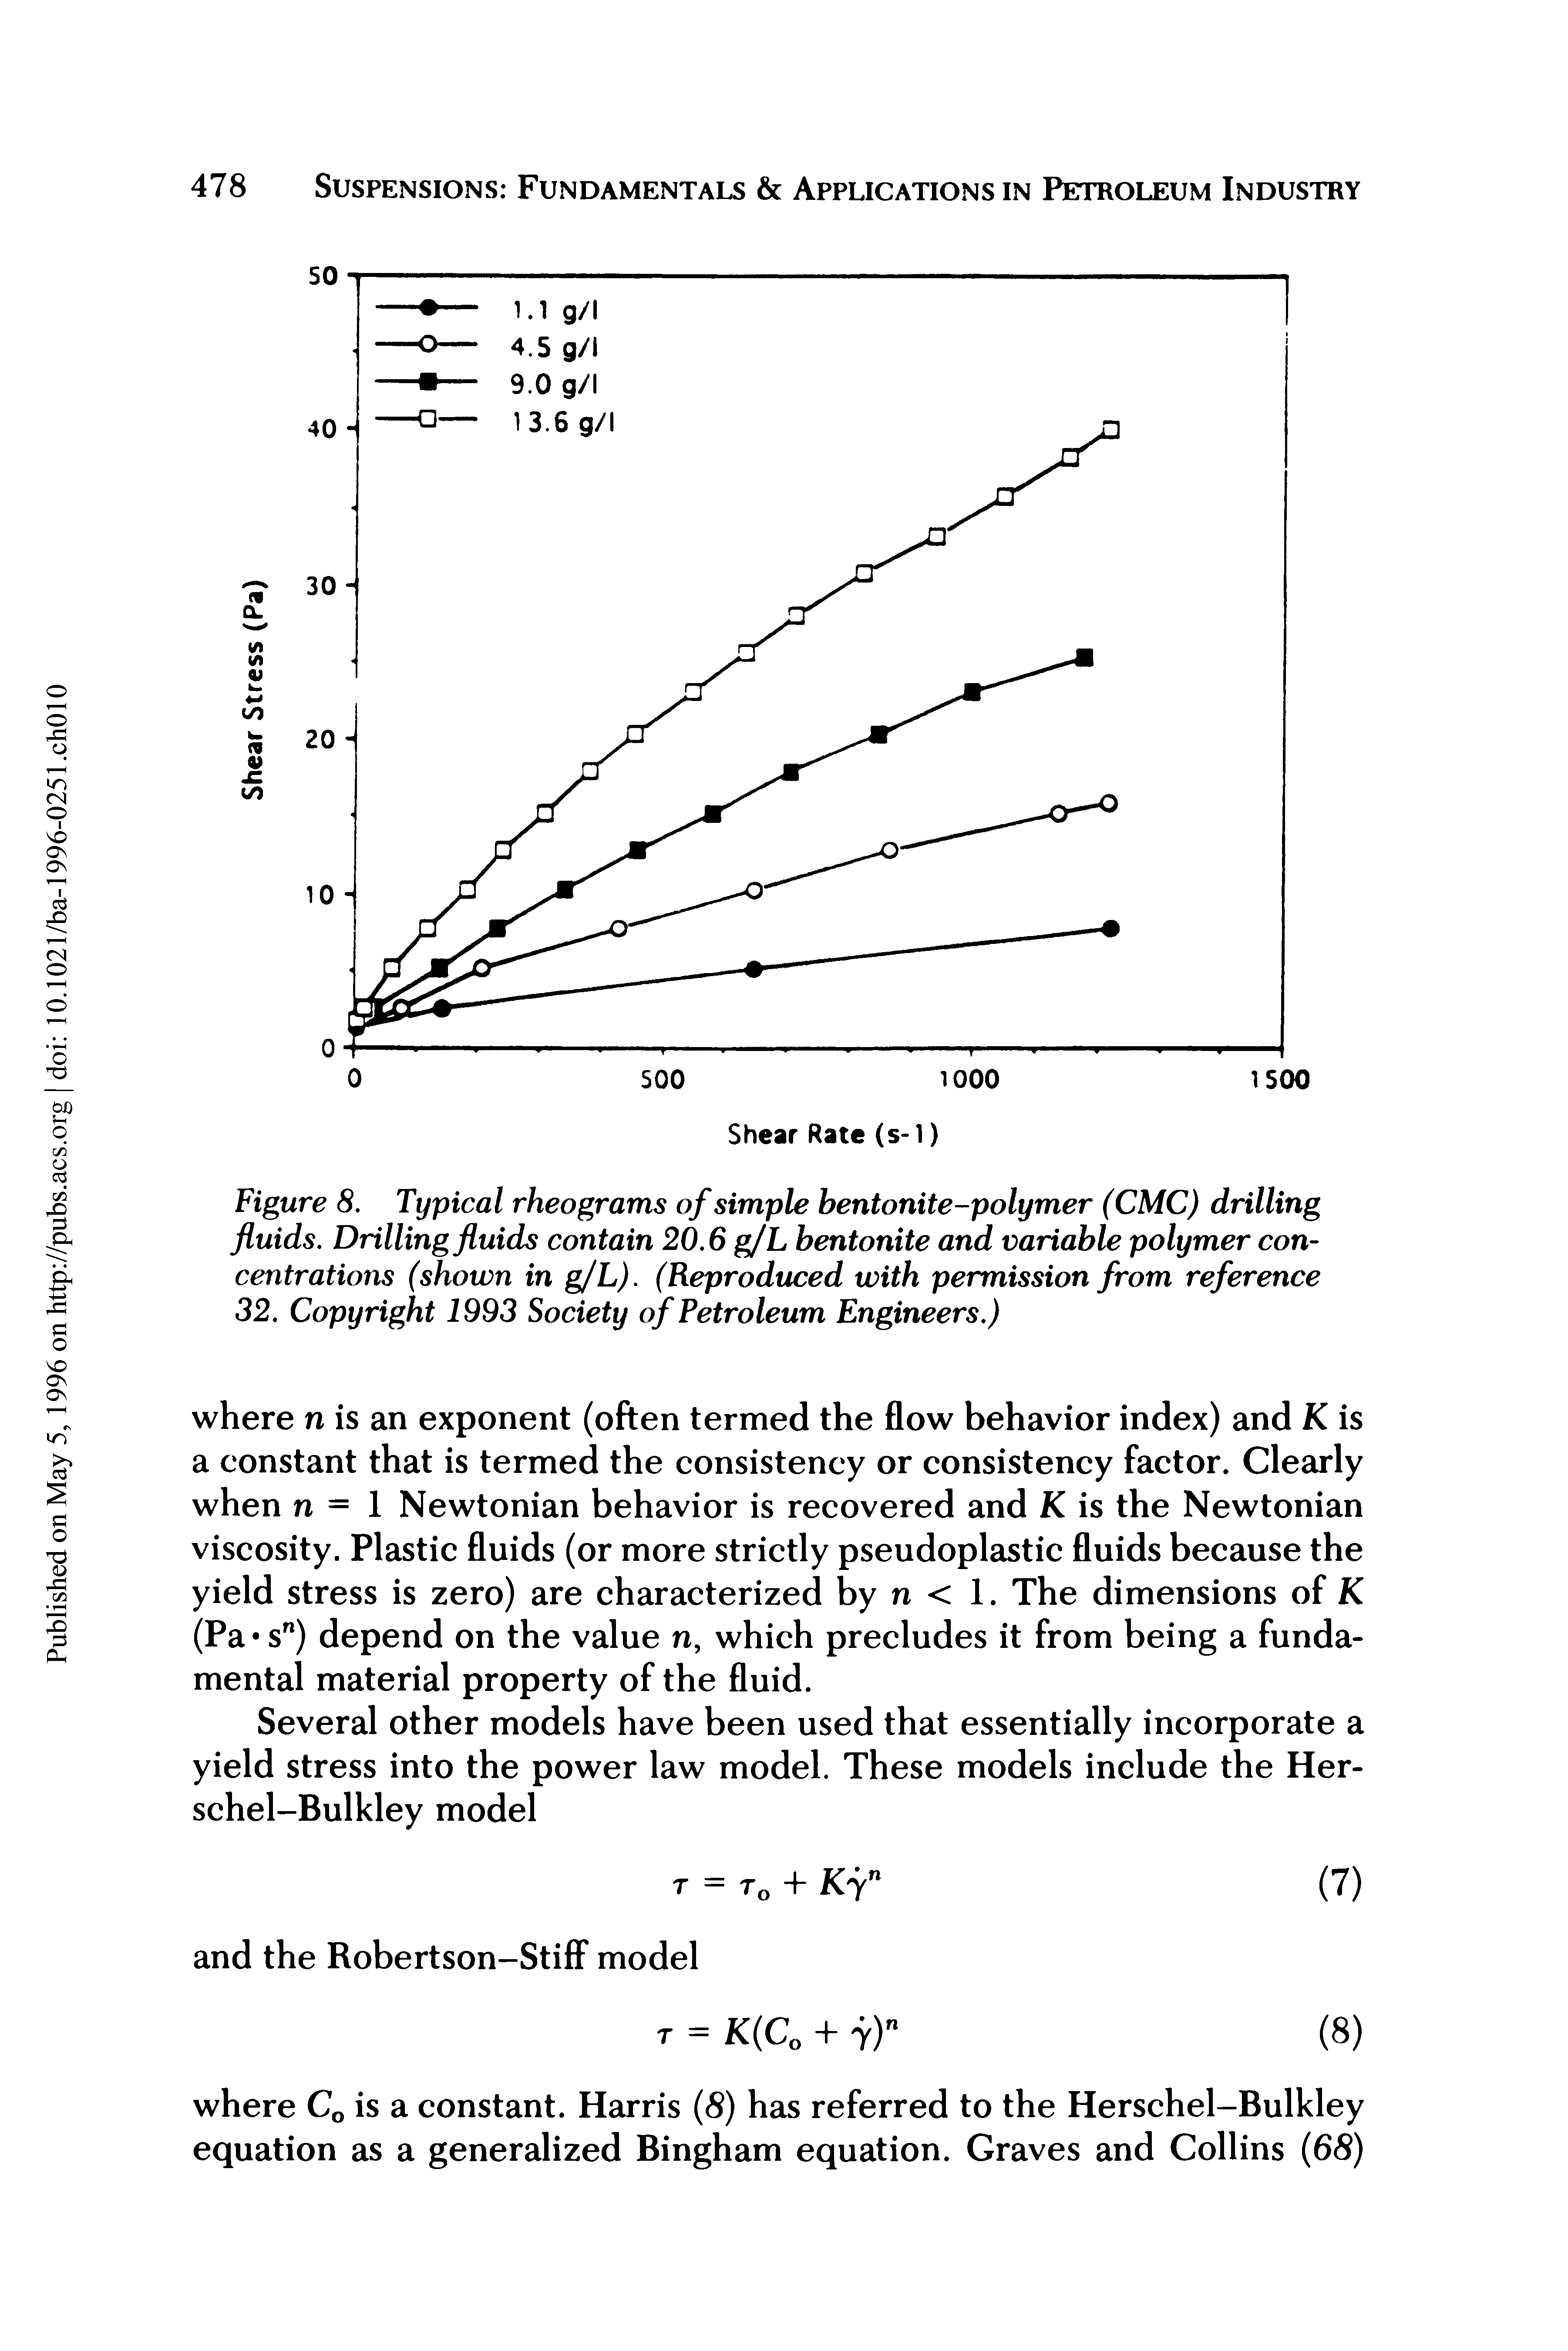 Figure 8. Typical rheograms of simple bentonite-polymer (CMC) drilling fluids. Drilling fluids contain 20.6 g/L bentonite and variable polymer concentrations (shown in g/L). (Reproduced with permission from reference 32. Copyright 1993 Society of Petroleum Engineers.)...